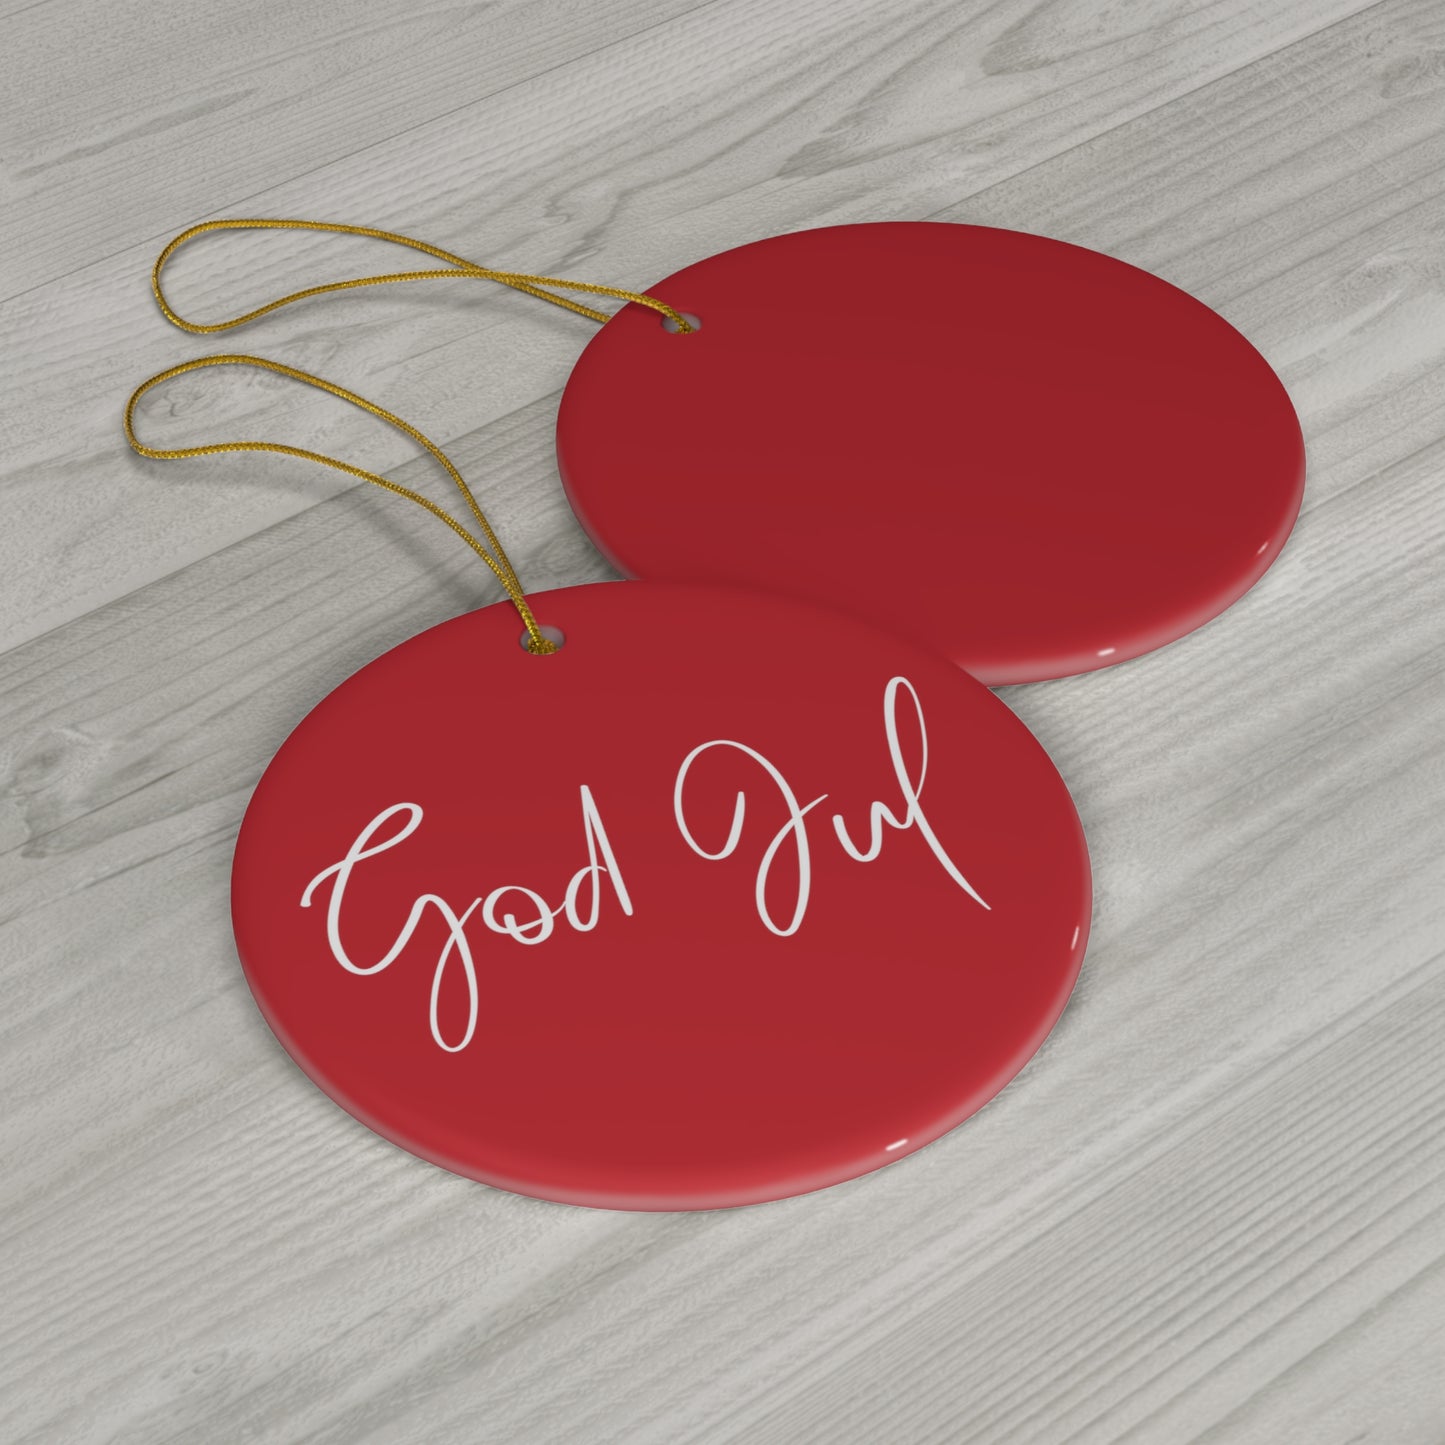 Red Christmas Ornament God Jul Norwegian Christmas Gift Norway Christmas Gift Norway Ornament Norwegian Decorations Norway Home Decor Gift